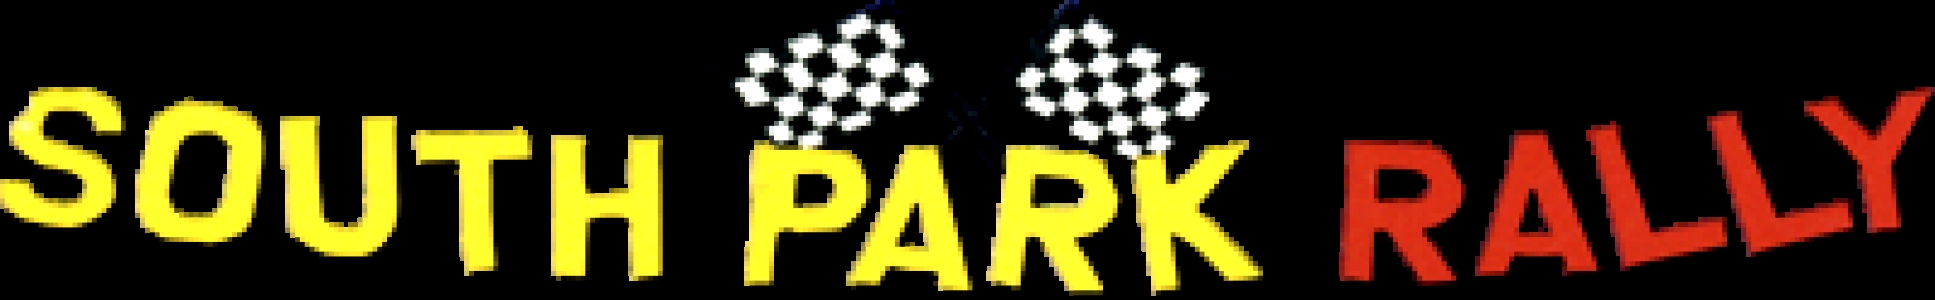 South Park Rally clearlogo